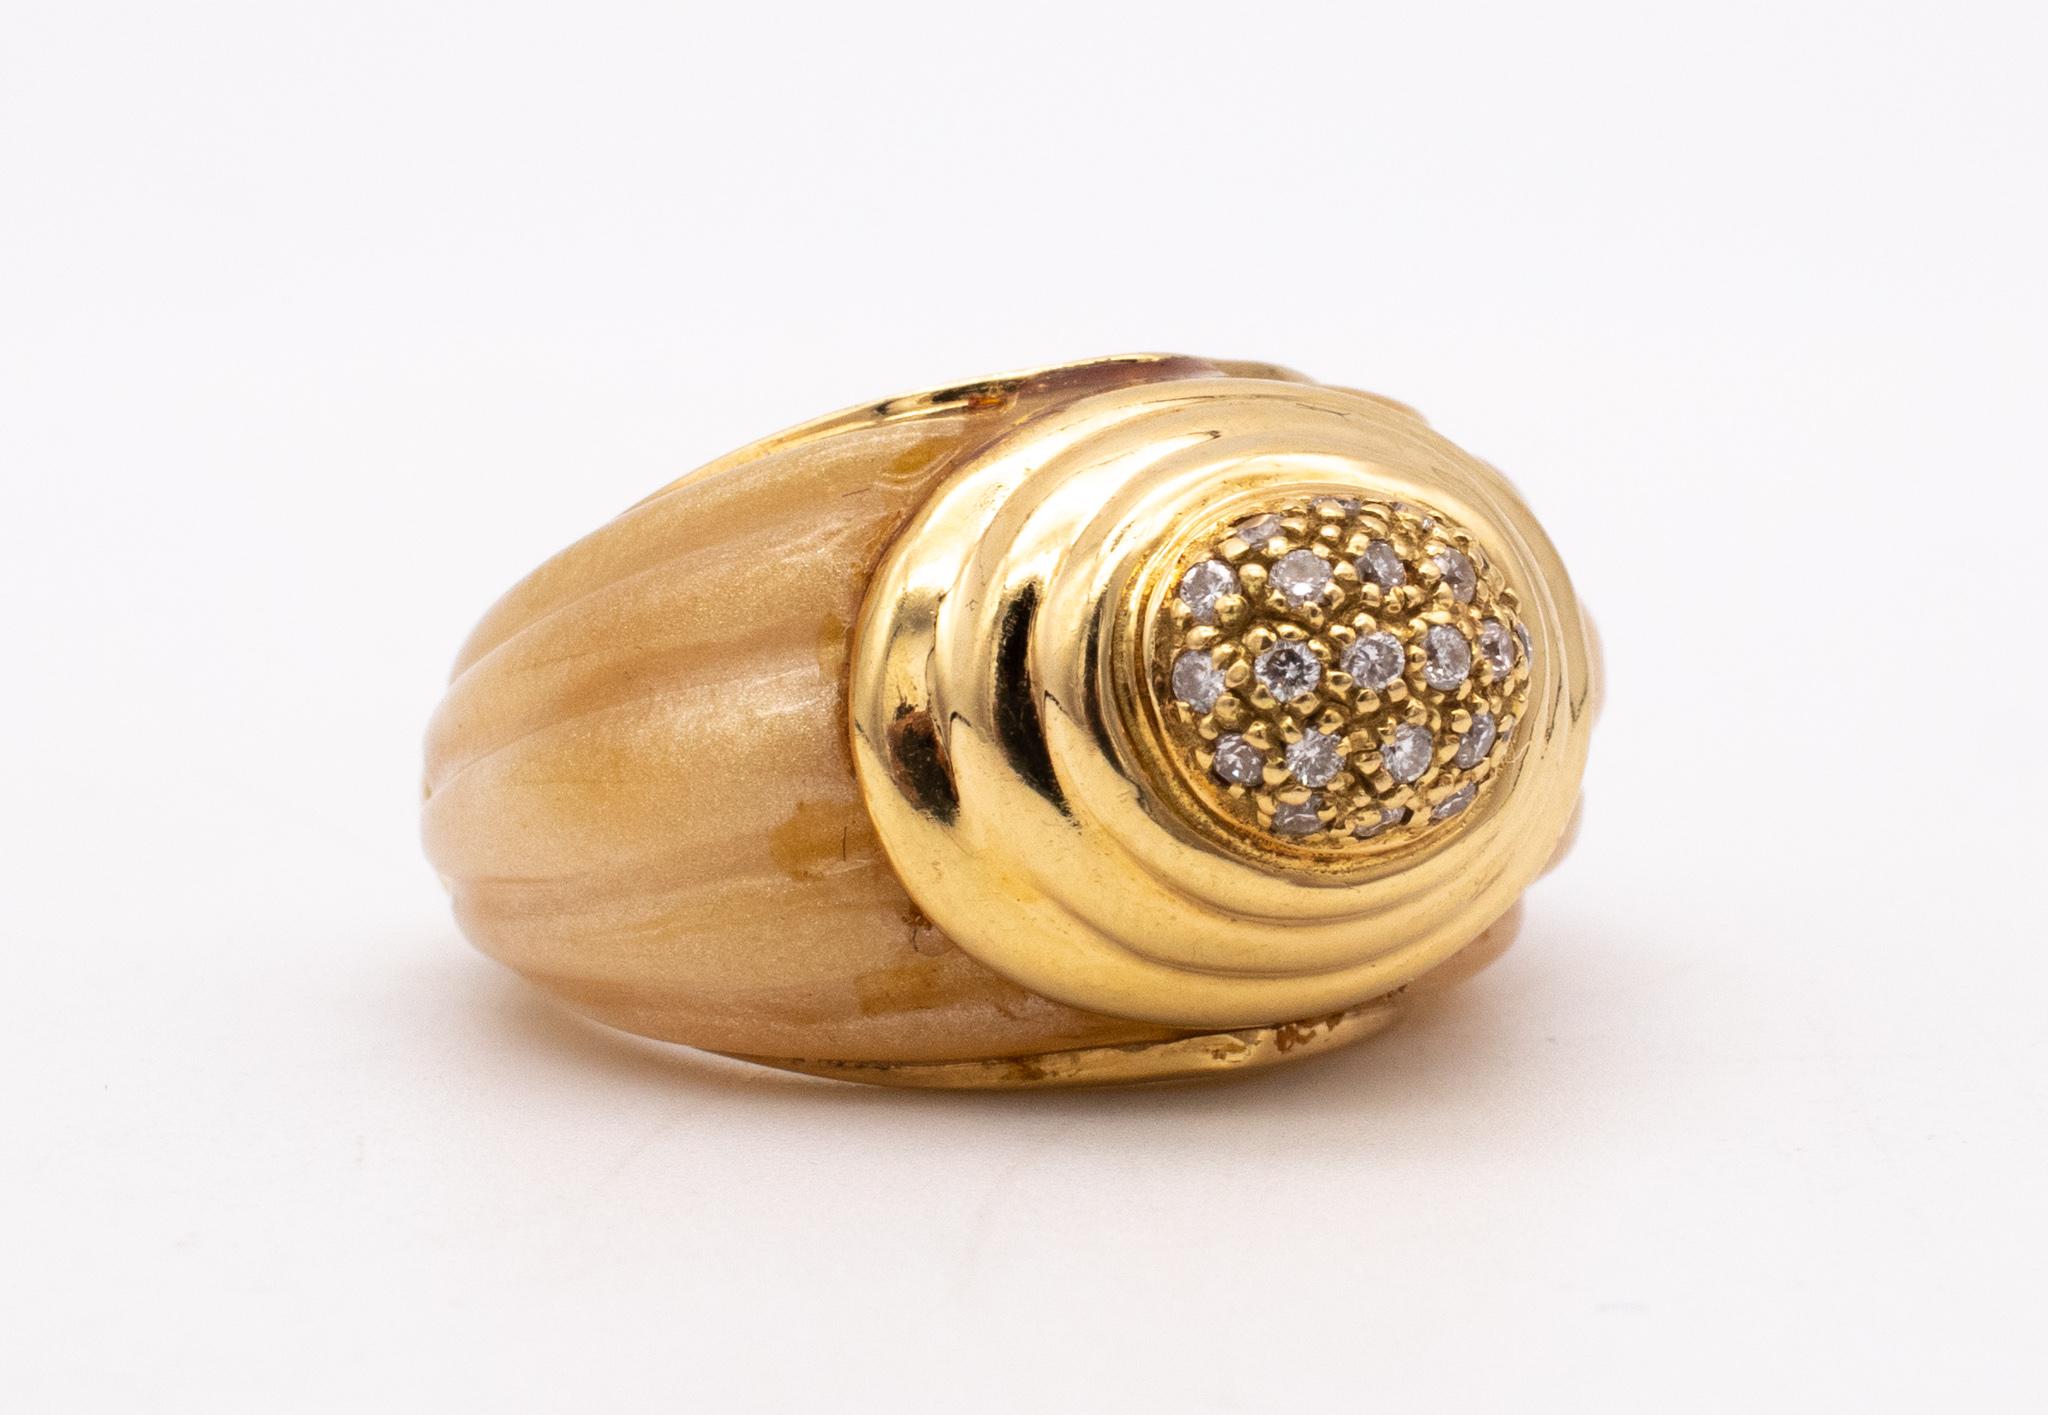 Brilliant Cut French 1960 Art Deco Retro Bakelite Cocktail Ring in 18Kt Gold with Diamonds